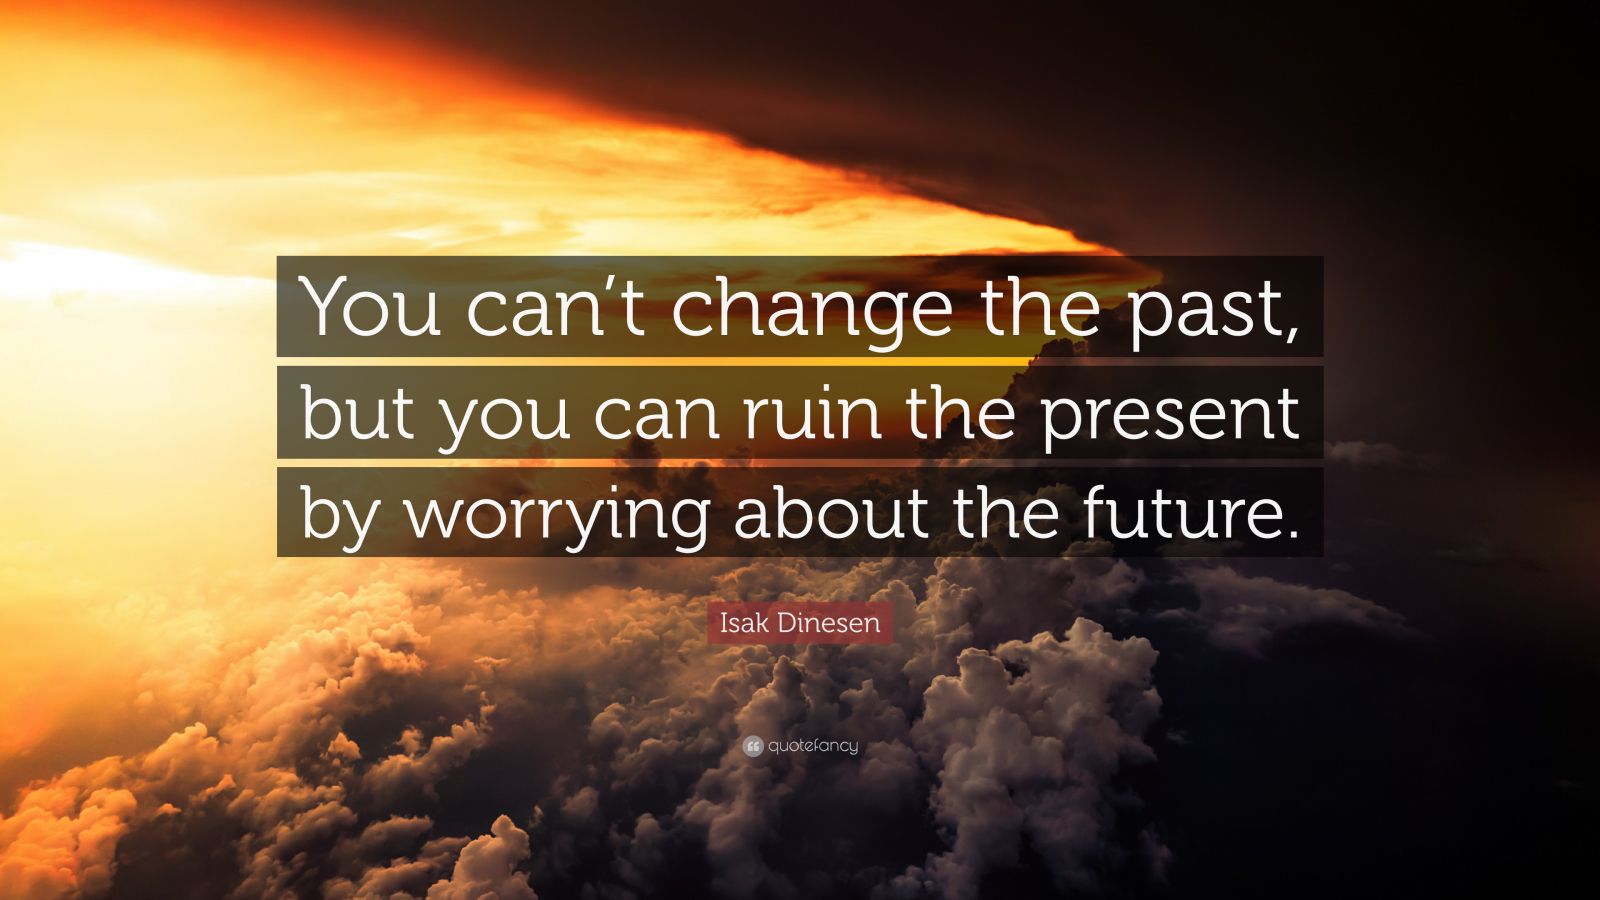 Isak Dinesen Quote: “You can’t change the past, but you can ruin the ...